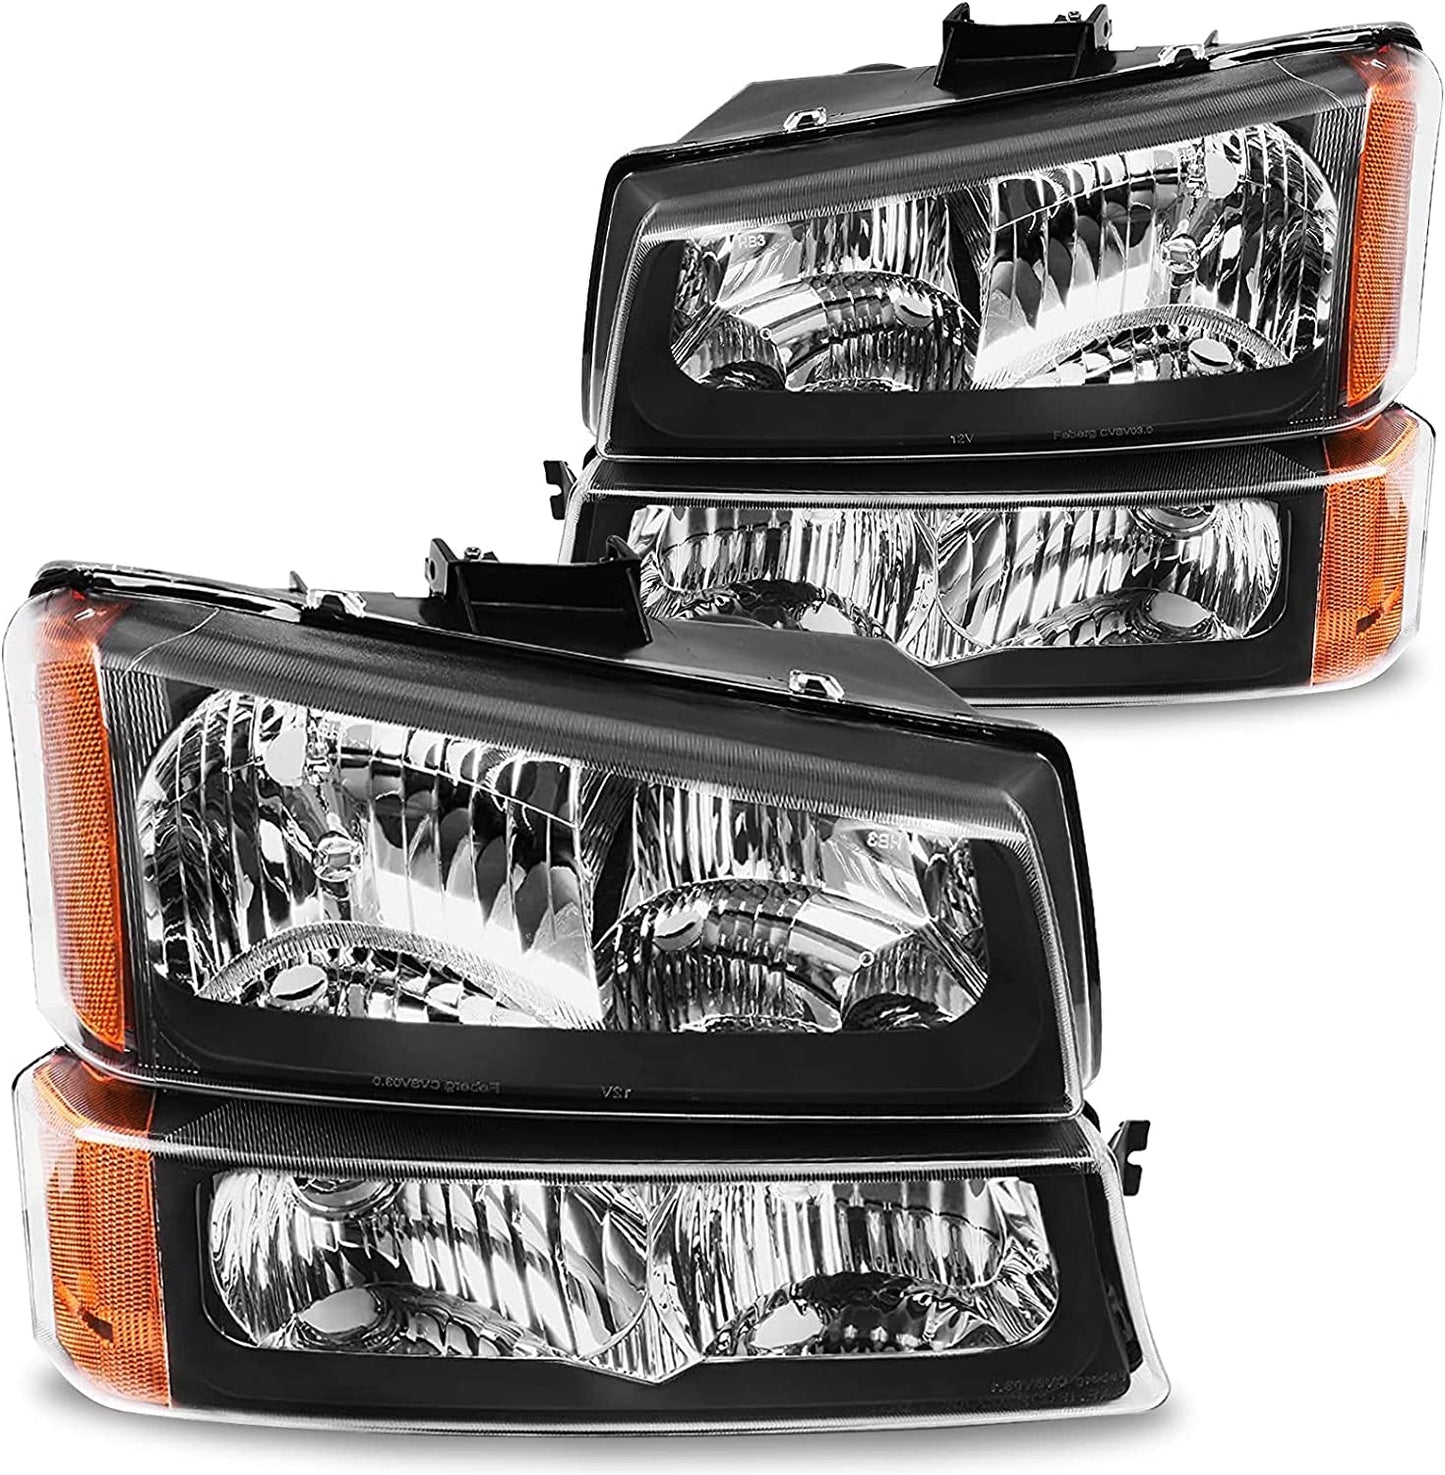 ADCARLIGHTS 2003-2006 Silverado Headlight Assembly for 2003-2006 Chevy Silverado Avalanche 1500/2500/3500 Clear Chrome Lens with Amber Reflector Replacement Left and Right